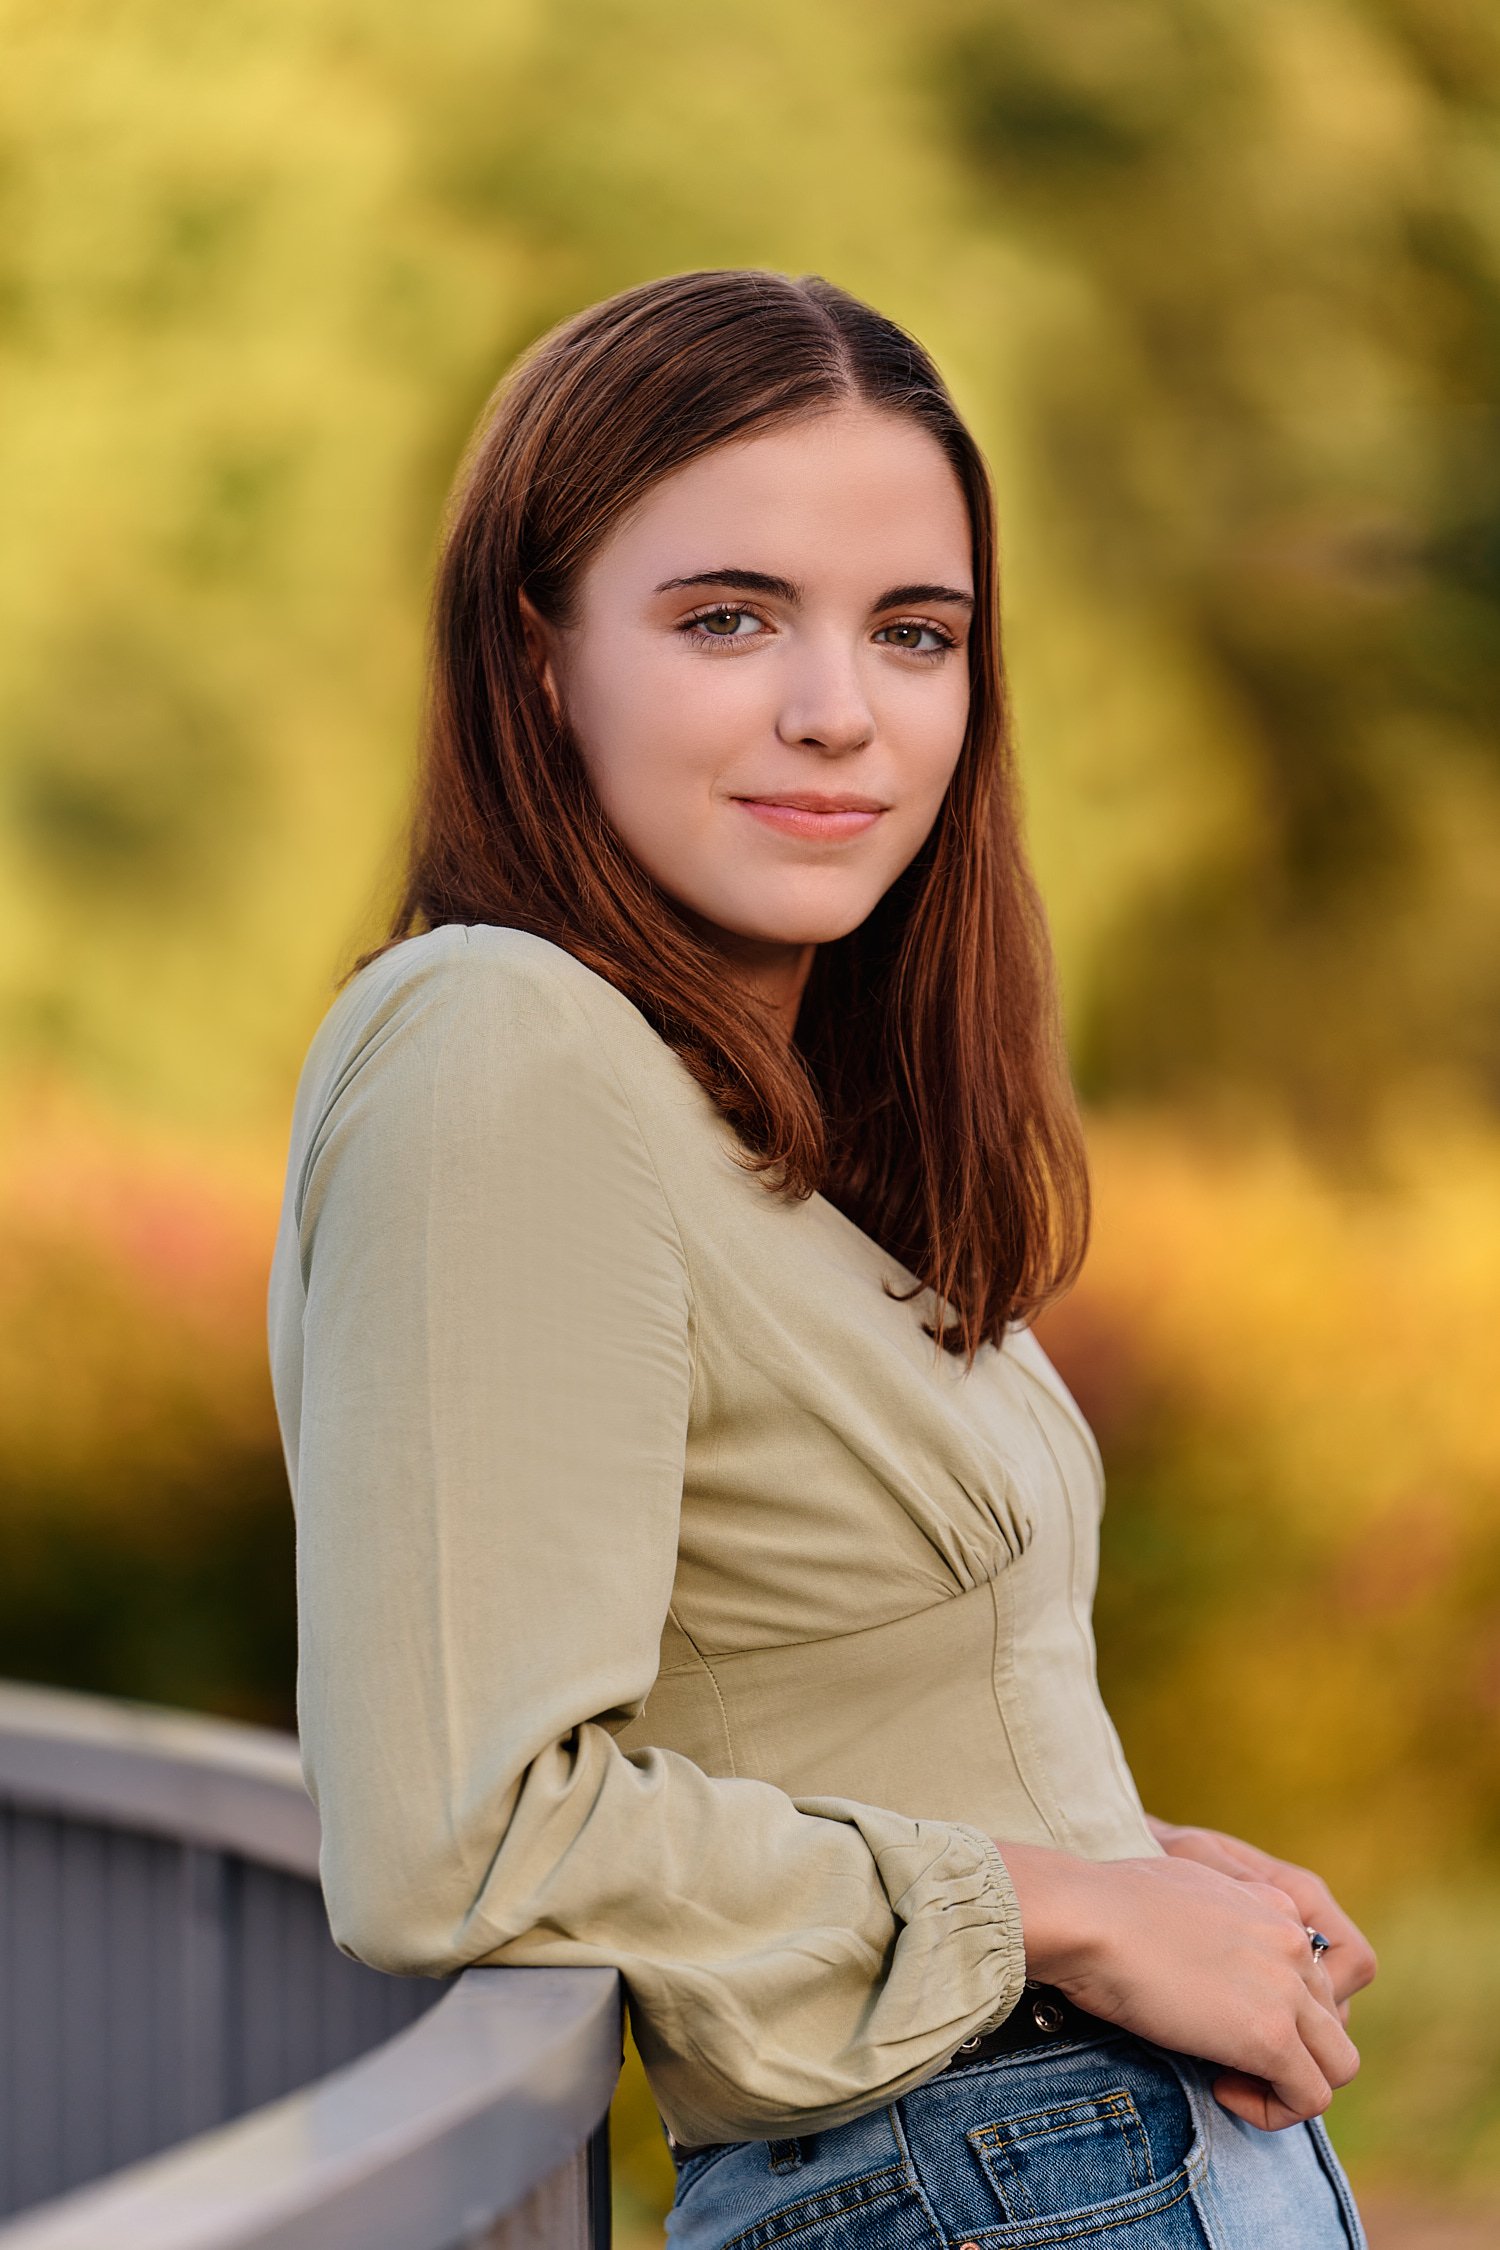  Josephine Reiter is posing for high school senior portraits at Phipps Conservatory in Schenley park and Homewood Cemetery in Pittsburgh. The October fall foliage colors are beautiful yellow & orange 